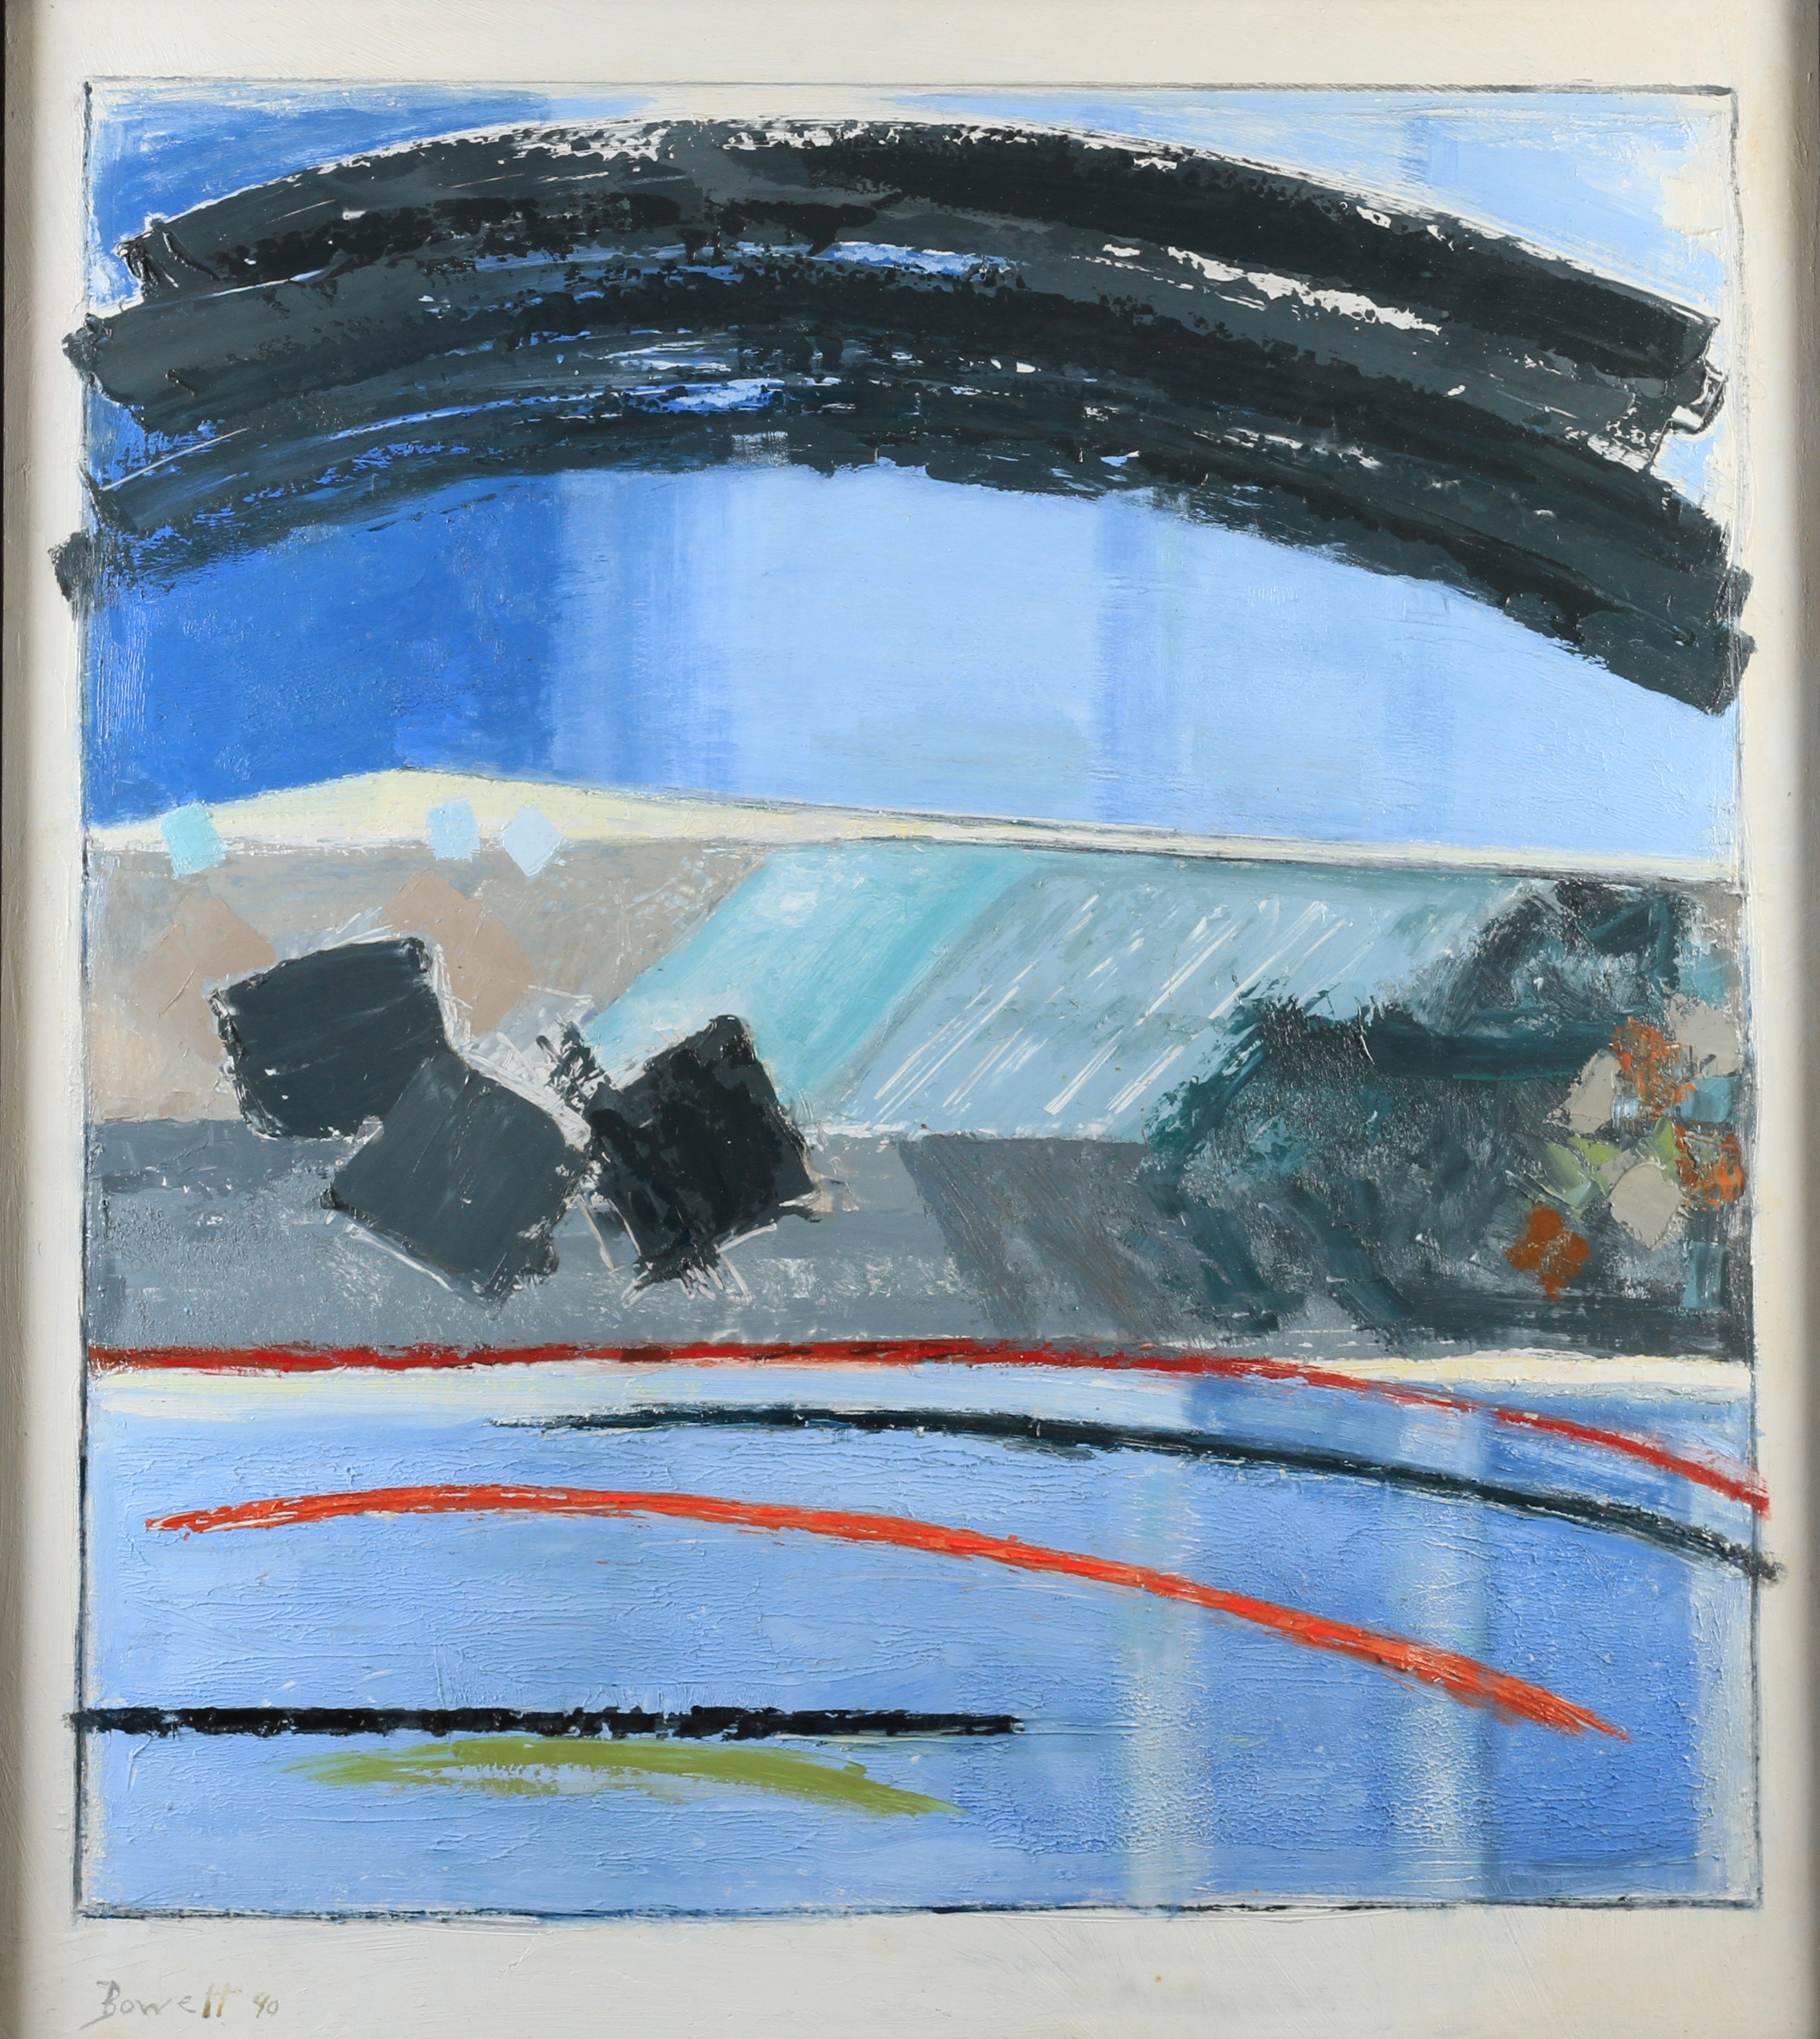 ARR DRUIE BOWETT (1924-1998) 'Yorkshire Set (Blue)' Oil on board, signed and dated 1990 to lower